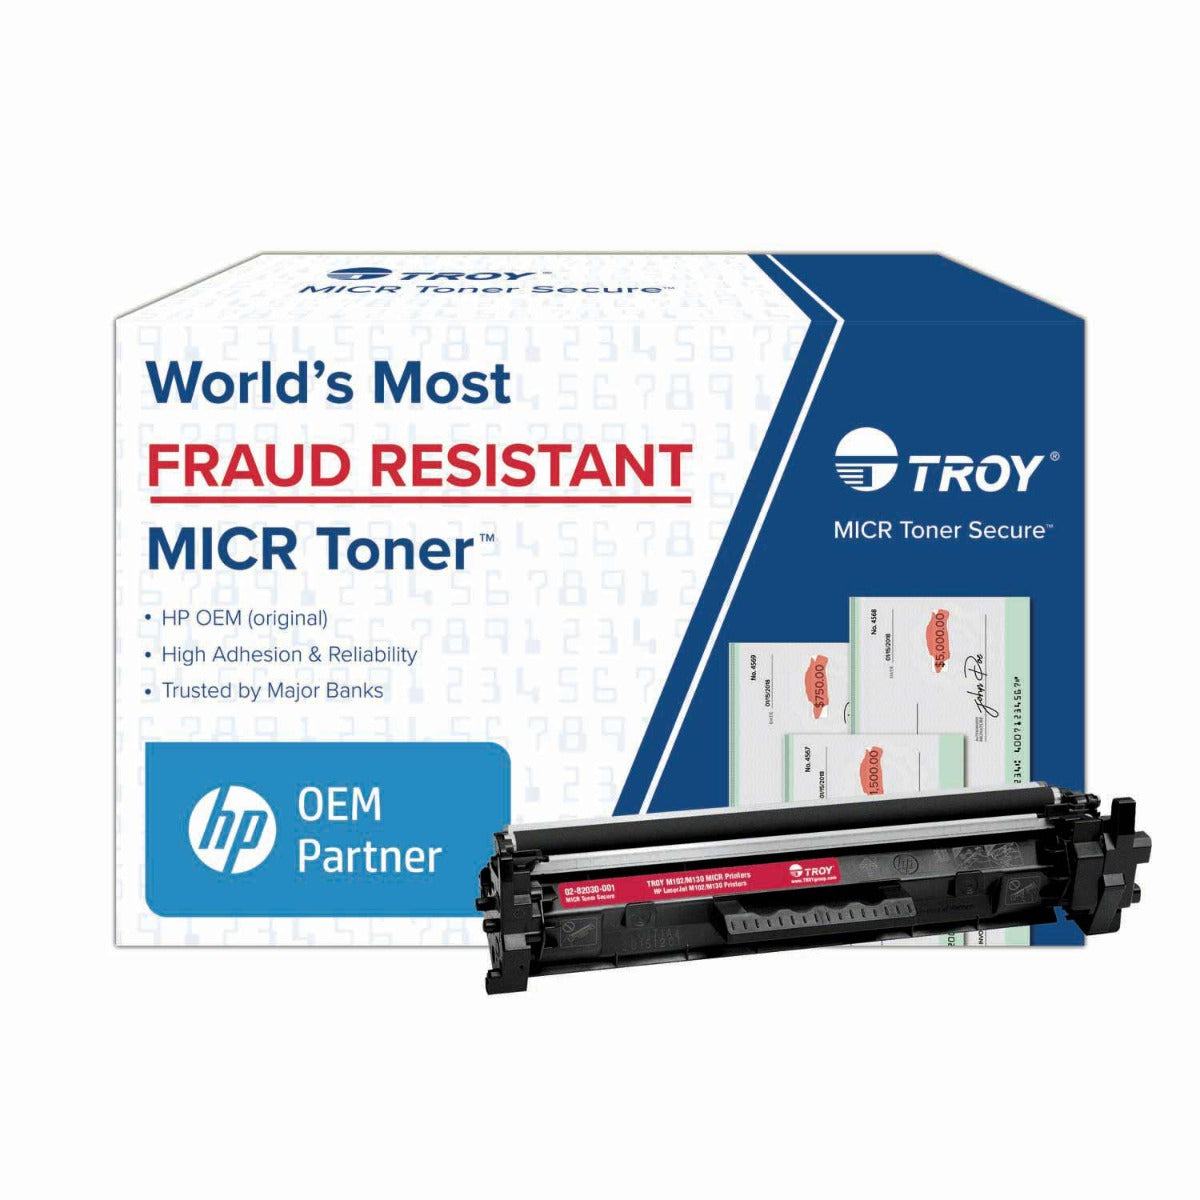 TROY M102/M130 mfp MICR Toner Secure Standard Yield Cartridge (Coordinating HP Part Number: CF217A)